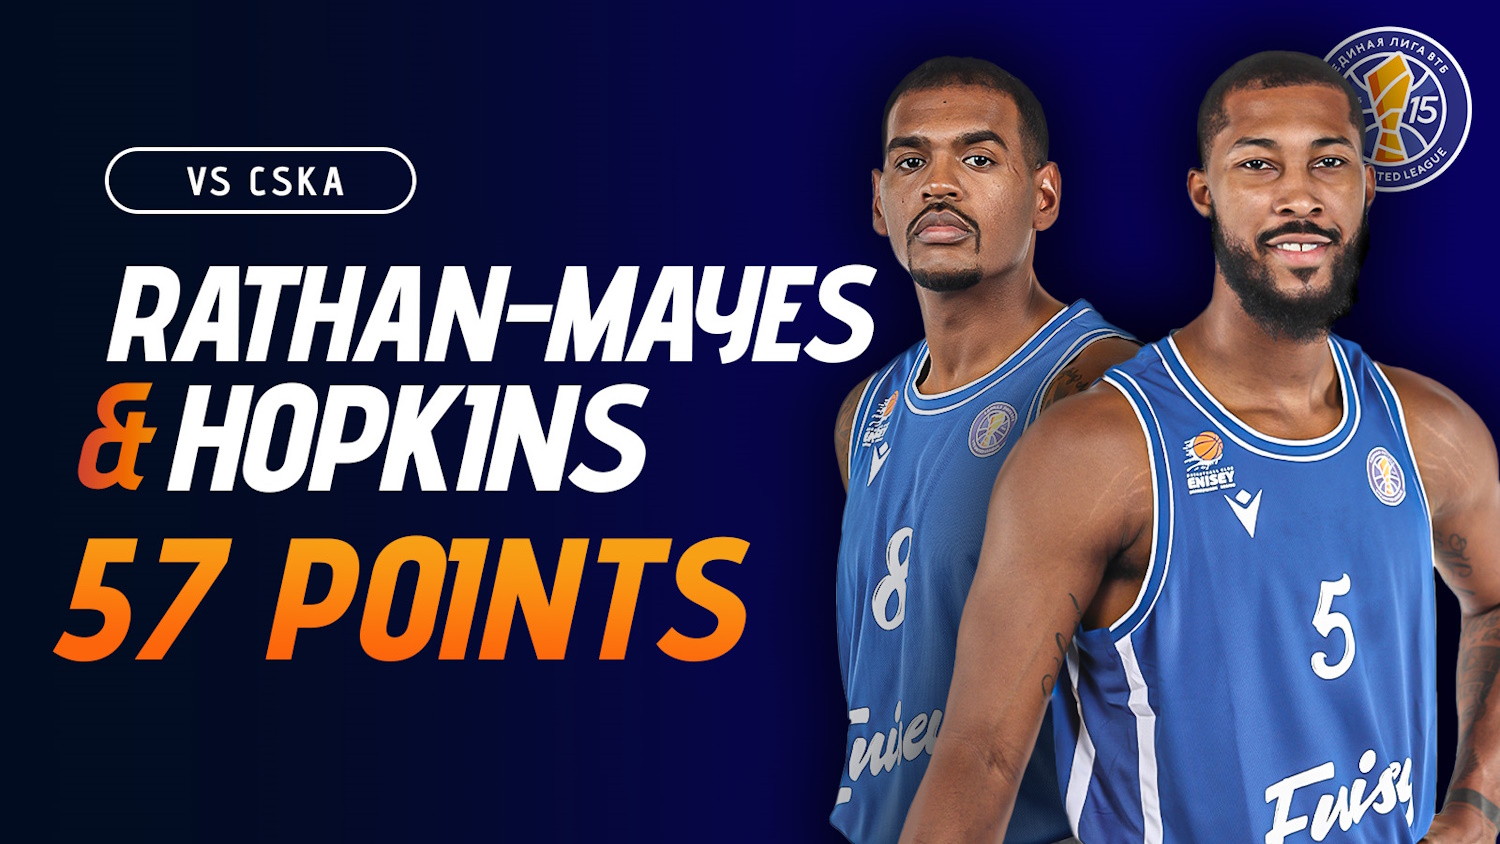 Xavier Rathan-Mayes and Mikael Hopkins combined for 57 points in the winning against CSKA